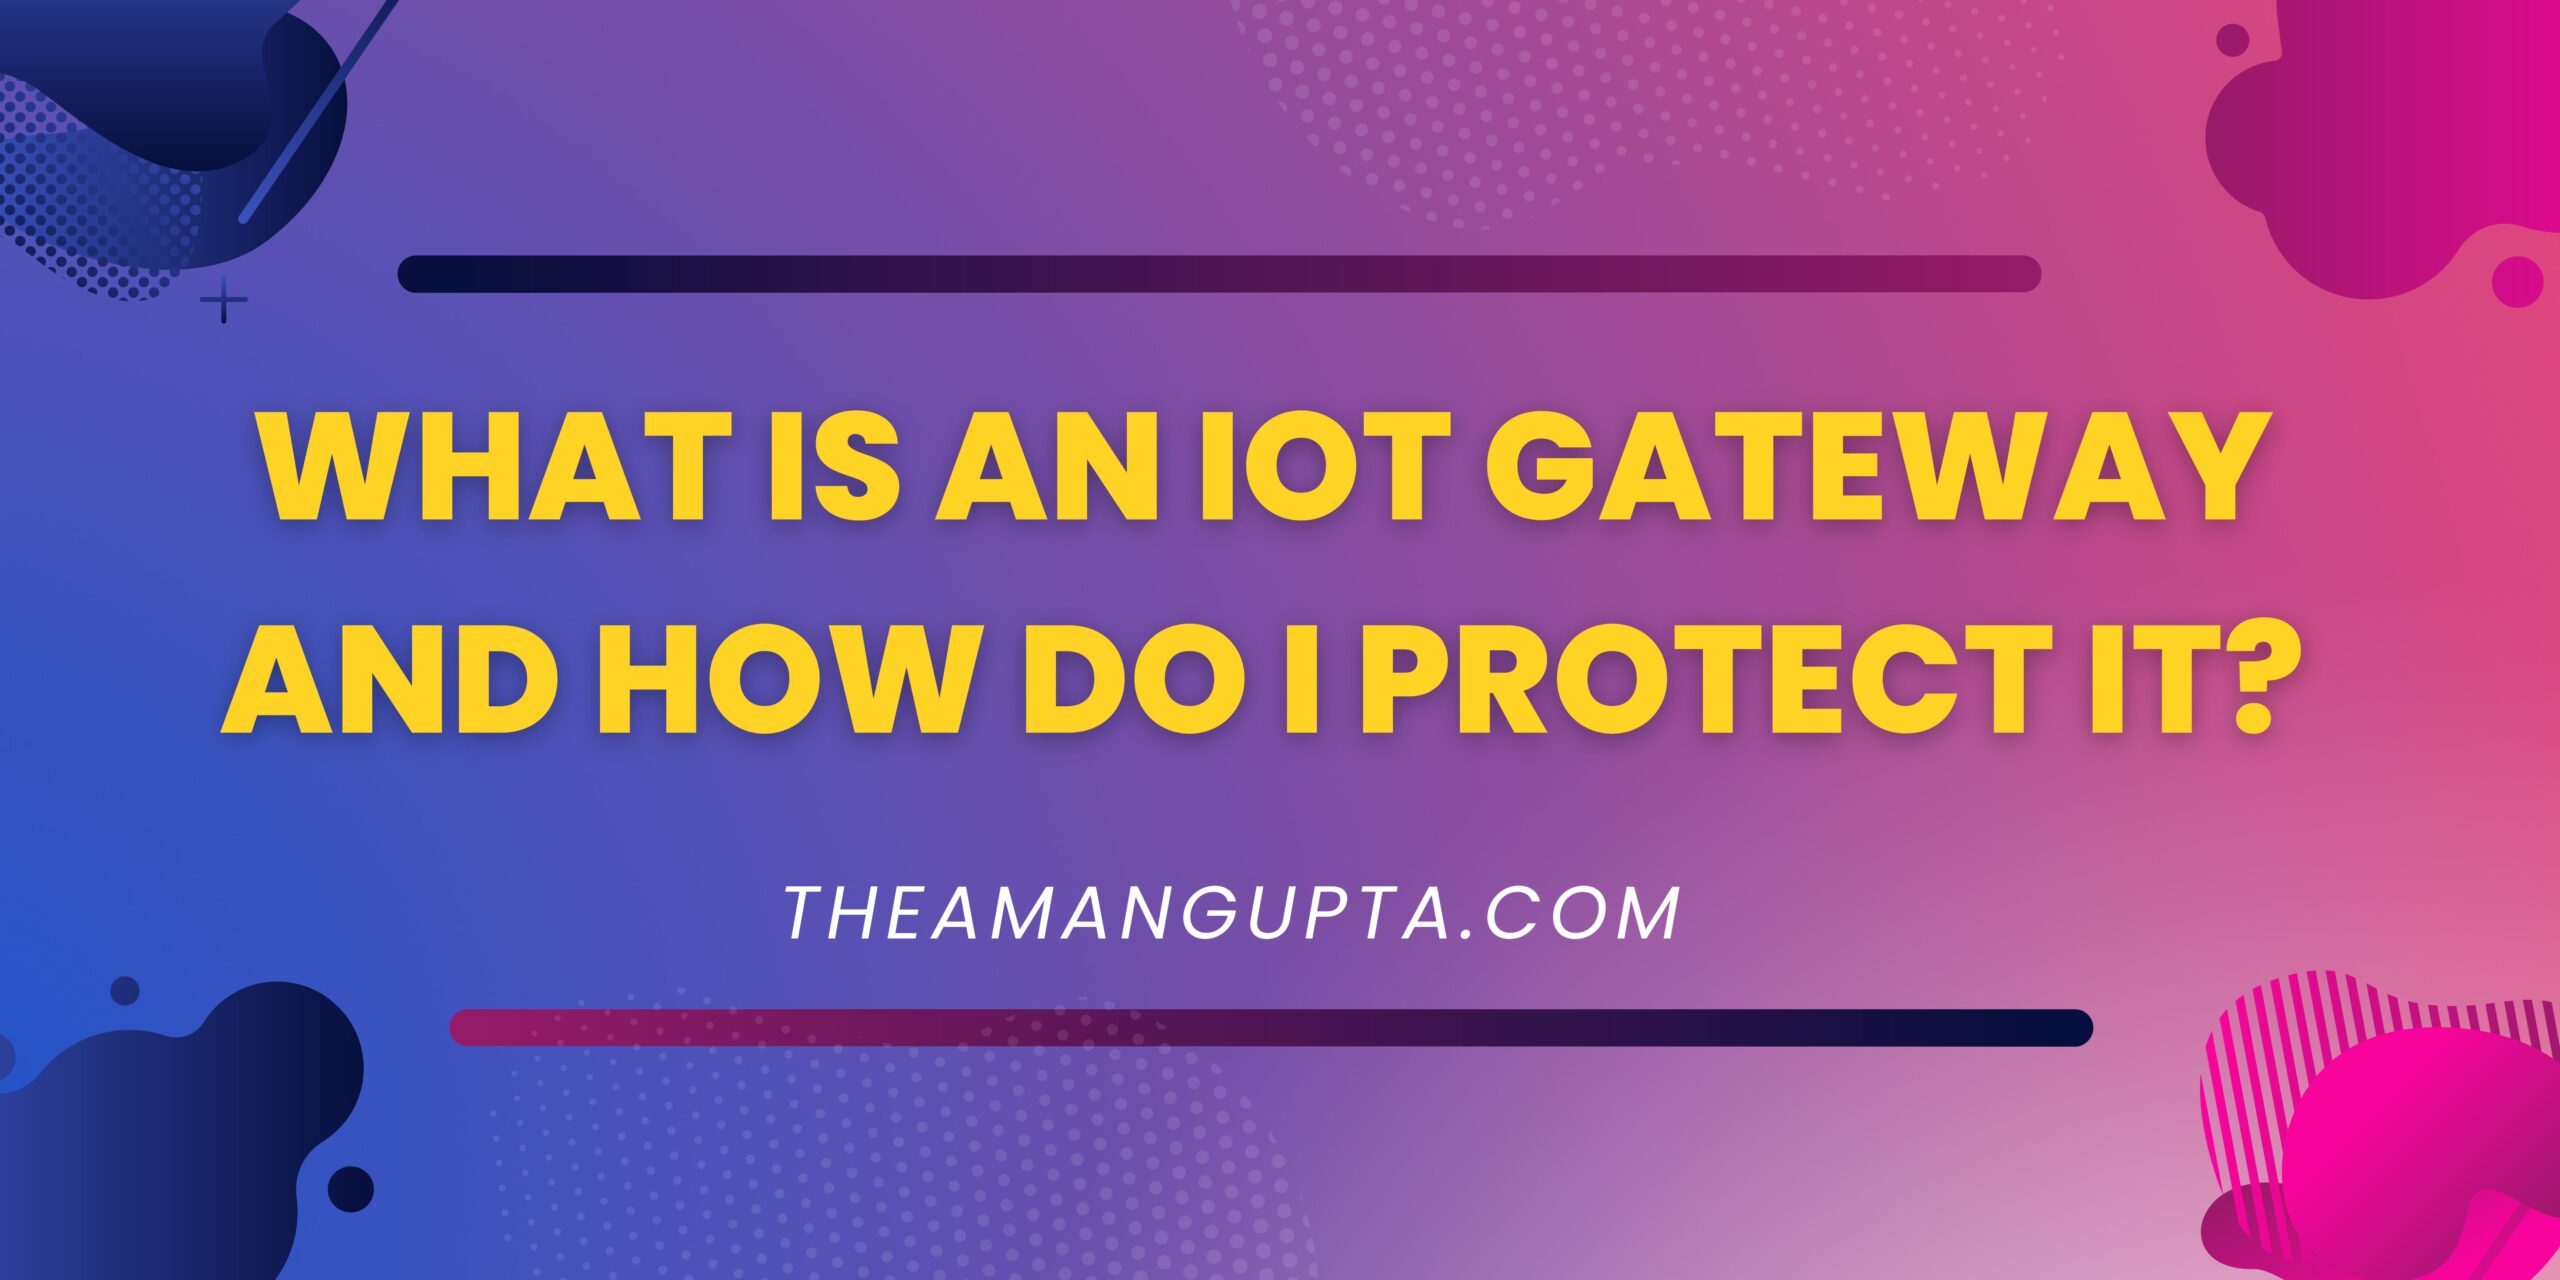 What Is An IoT Gateway And How Do I Protect It|IOT Gate|Theamangupta|Theamangupta